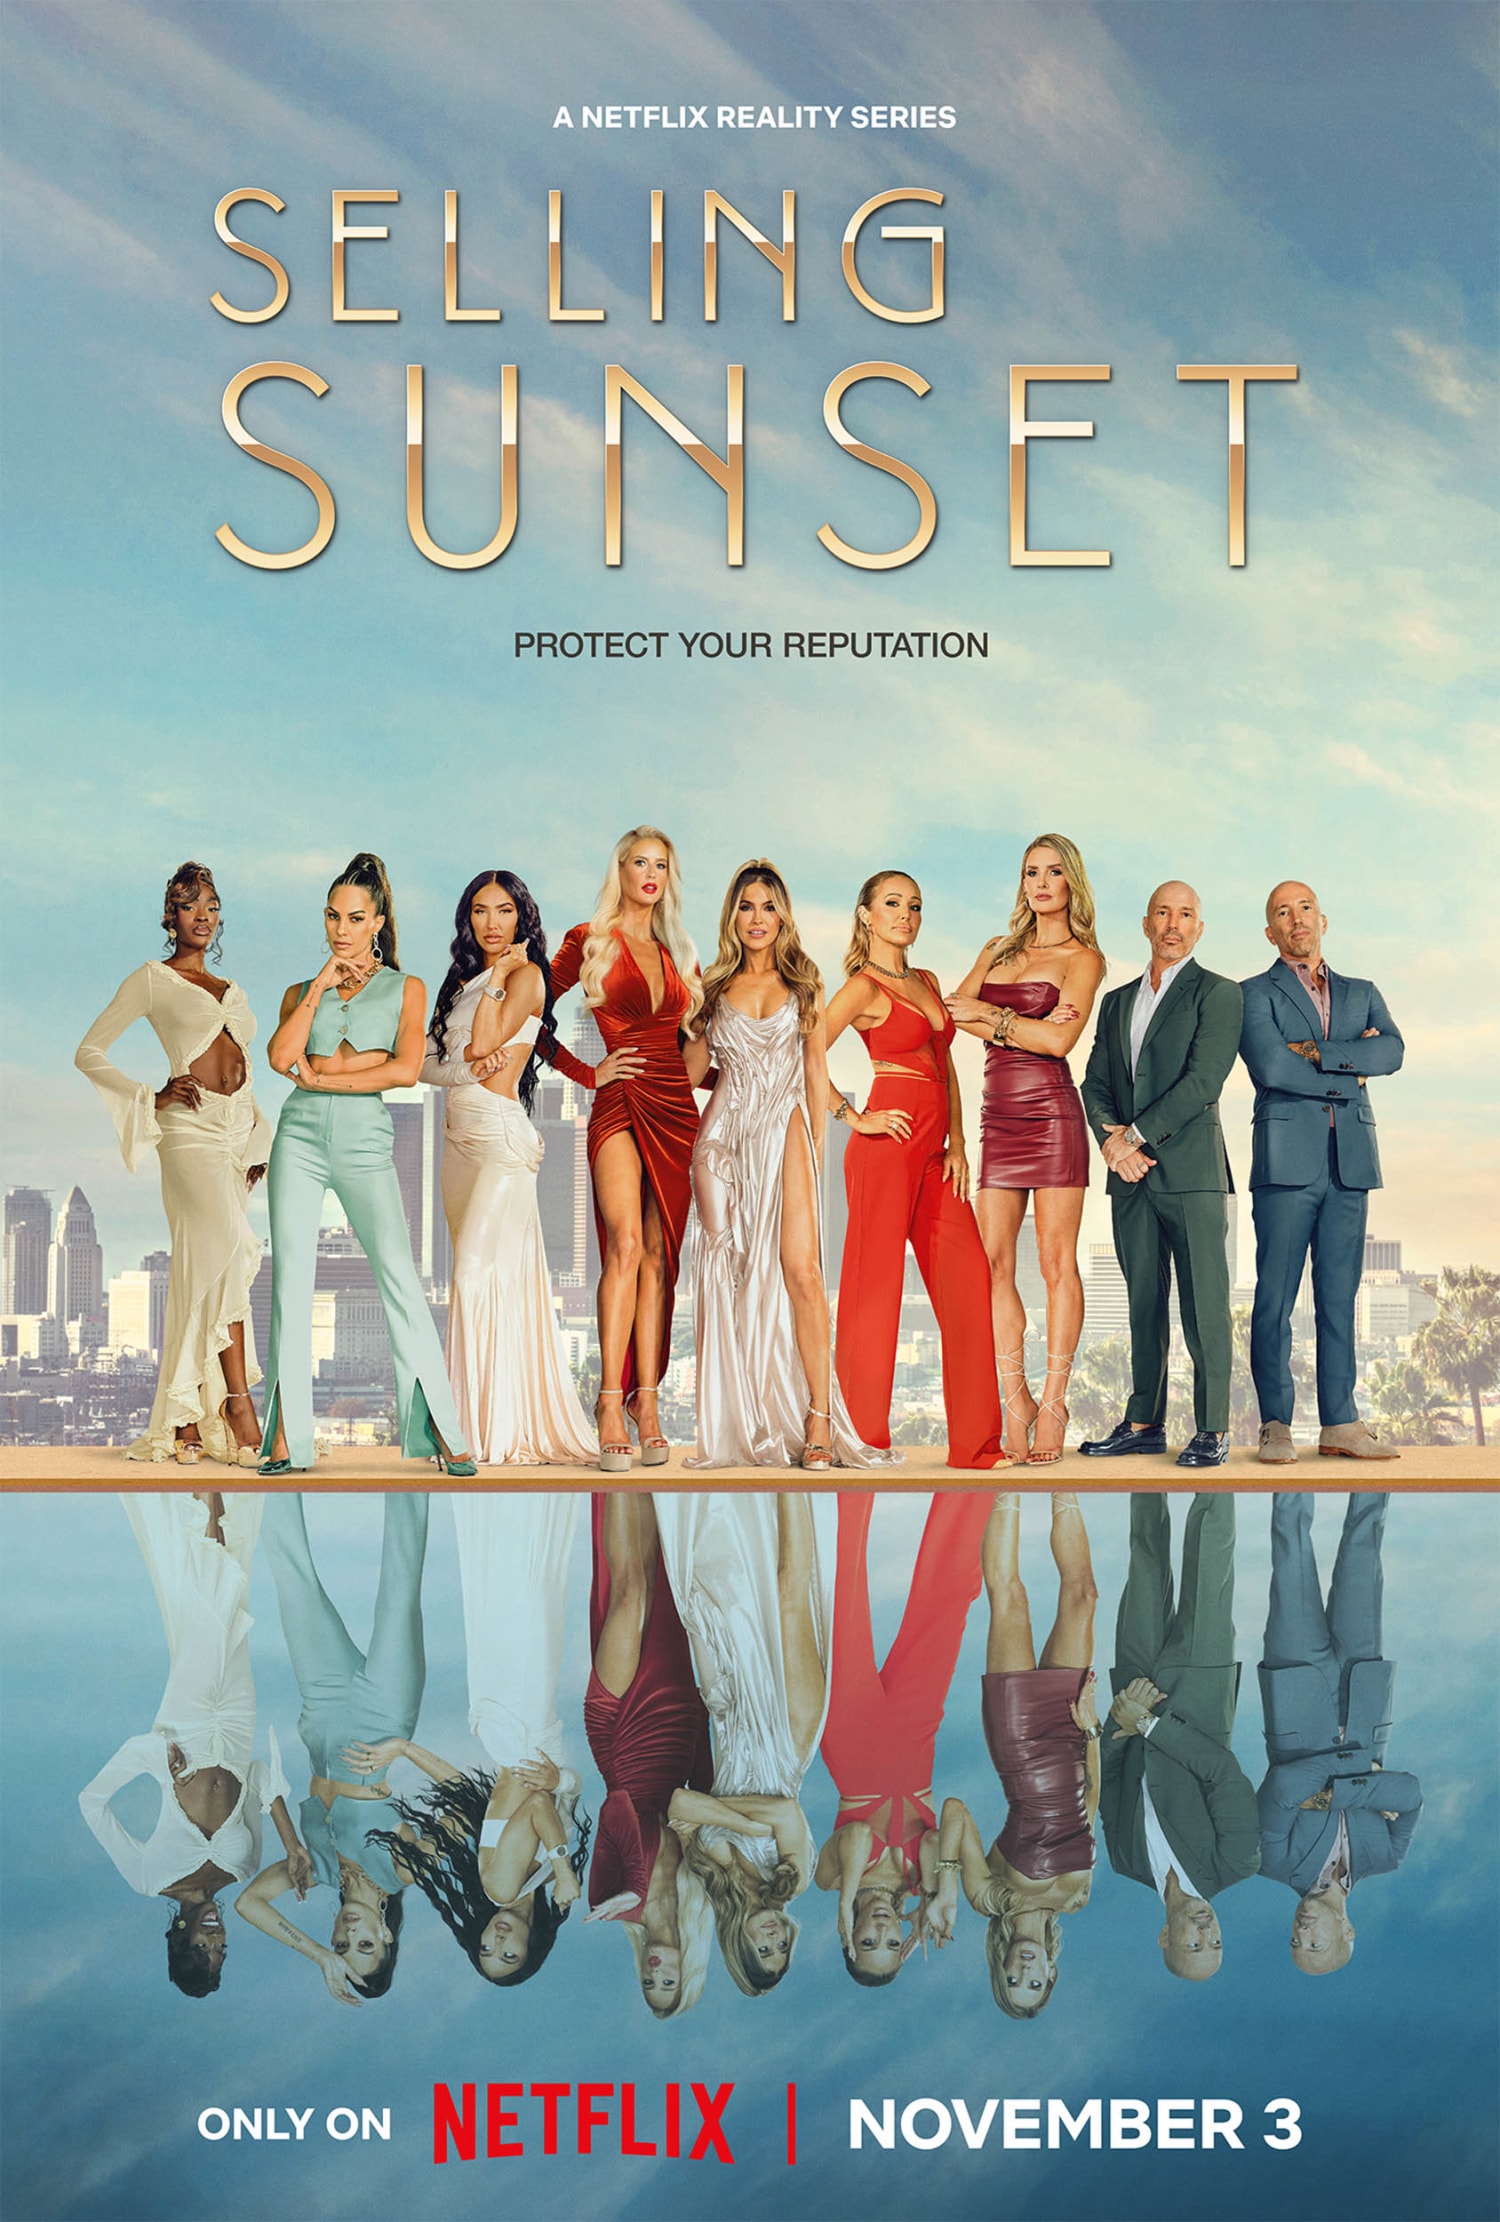 Selling Sunset': Do the Cast Members Pay for Their Own Clothes?